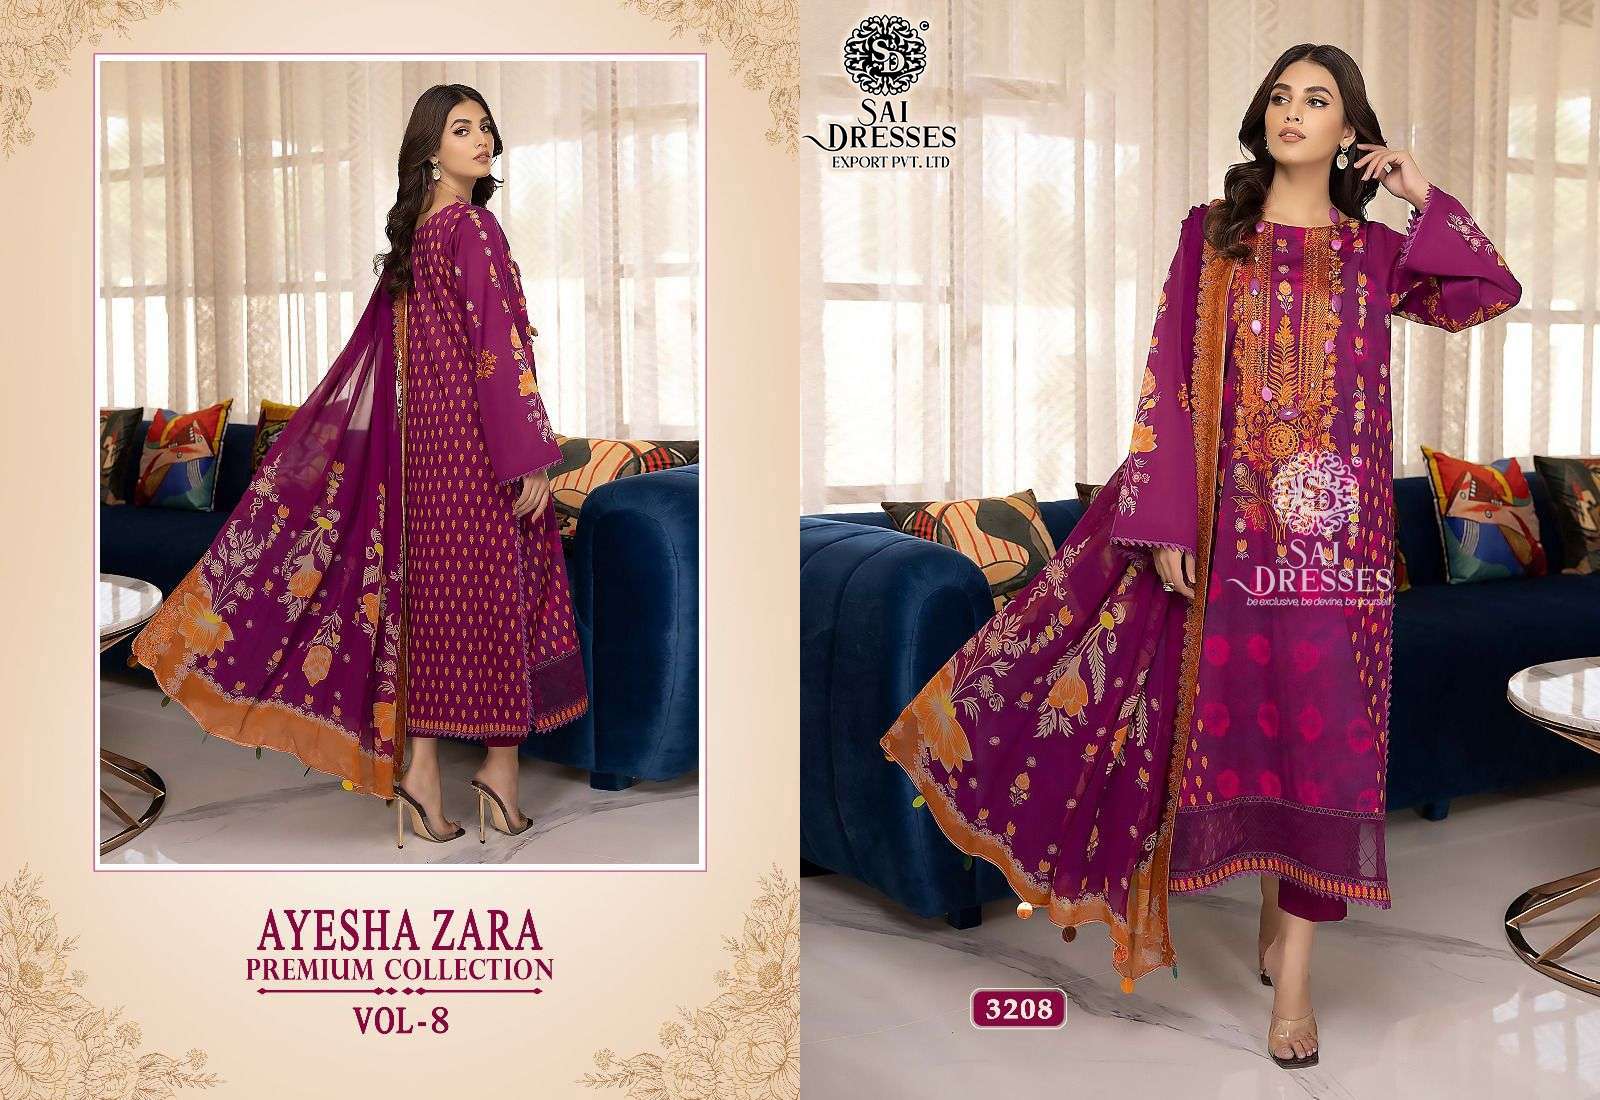 SAI DRESSES PRESENT AYESHA ZARA PREMIUM COLLECTION VOL 8 PURE COTTON WITH EXCLUSIVE PATCH WORK PAKISTANI DESIGNER SALWAR SUITS IN WHOLESALE RATE IN SURAT